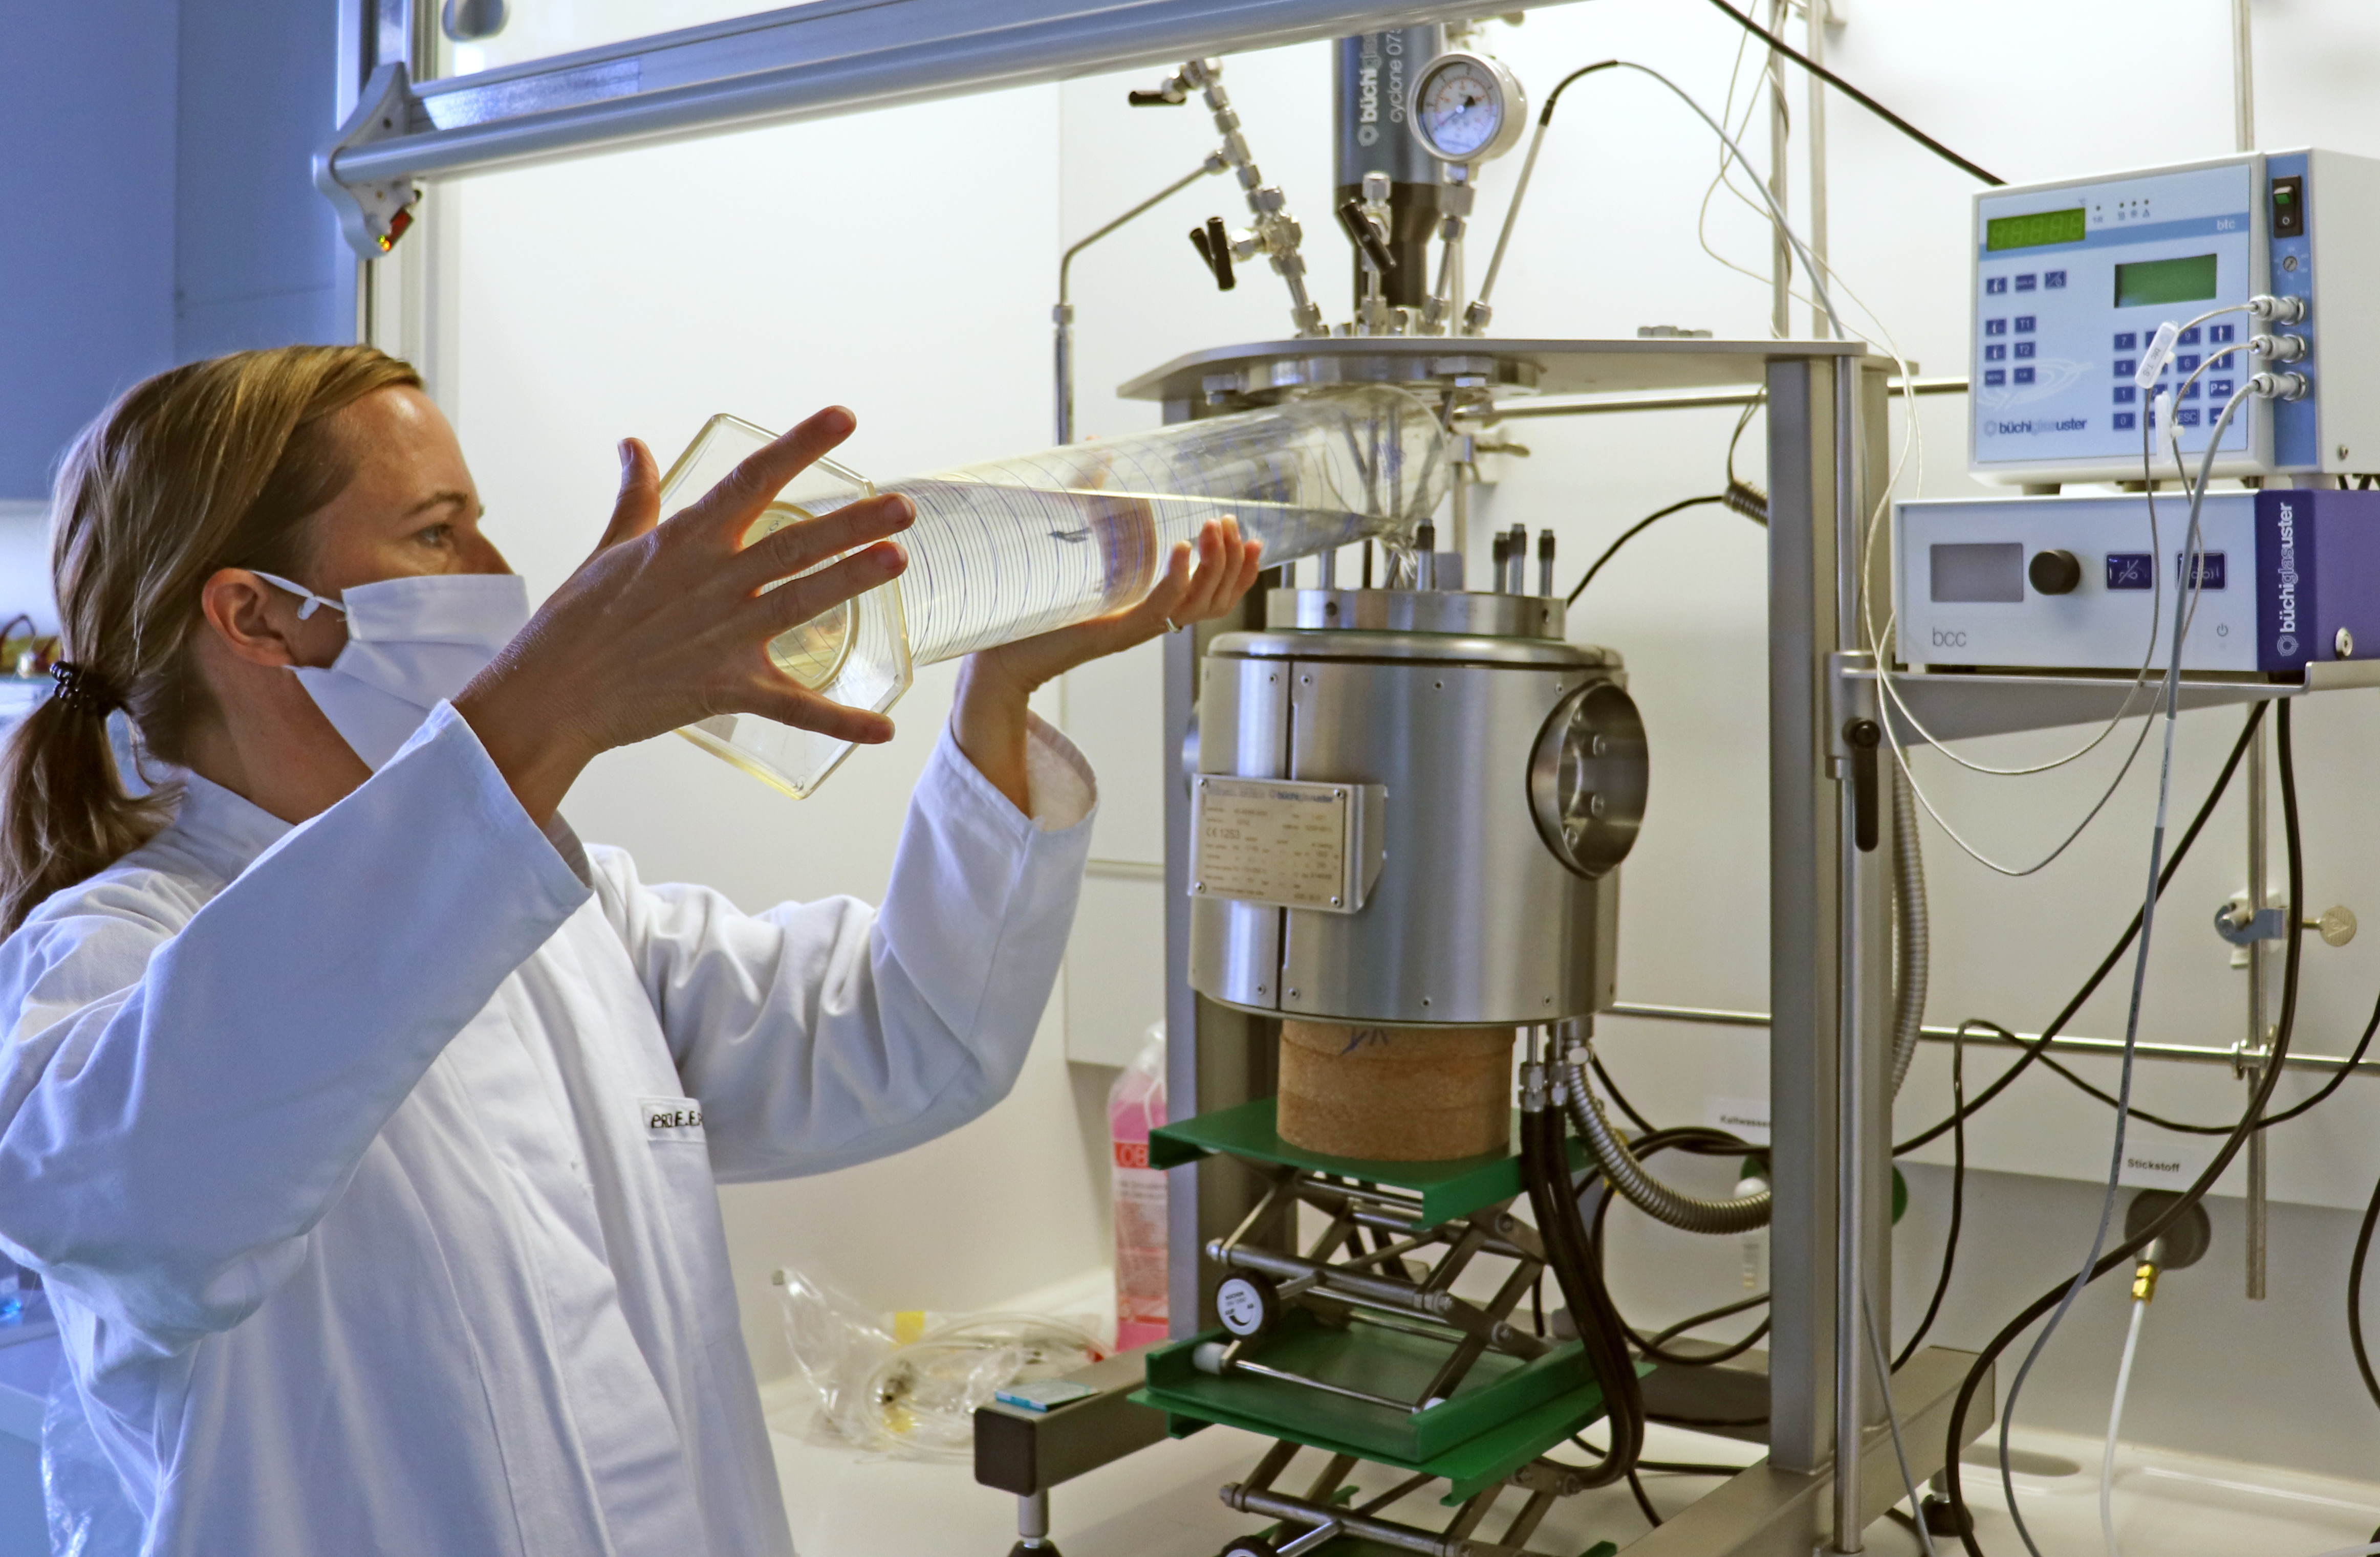 A woman in a white lab coat can be seen in front of a stainless steel apparatus. The woman fills a clear liquid from a large measuring cylinder into the stainless steel container of the apparatus.